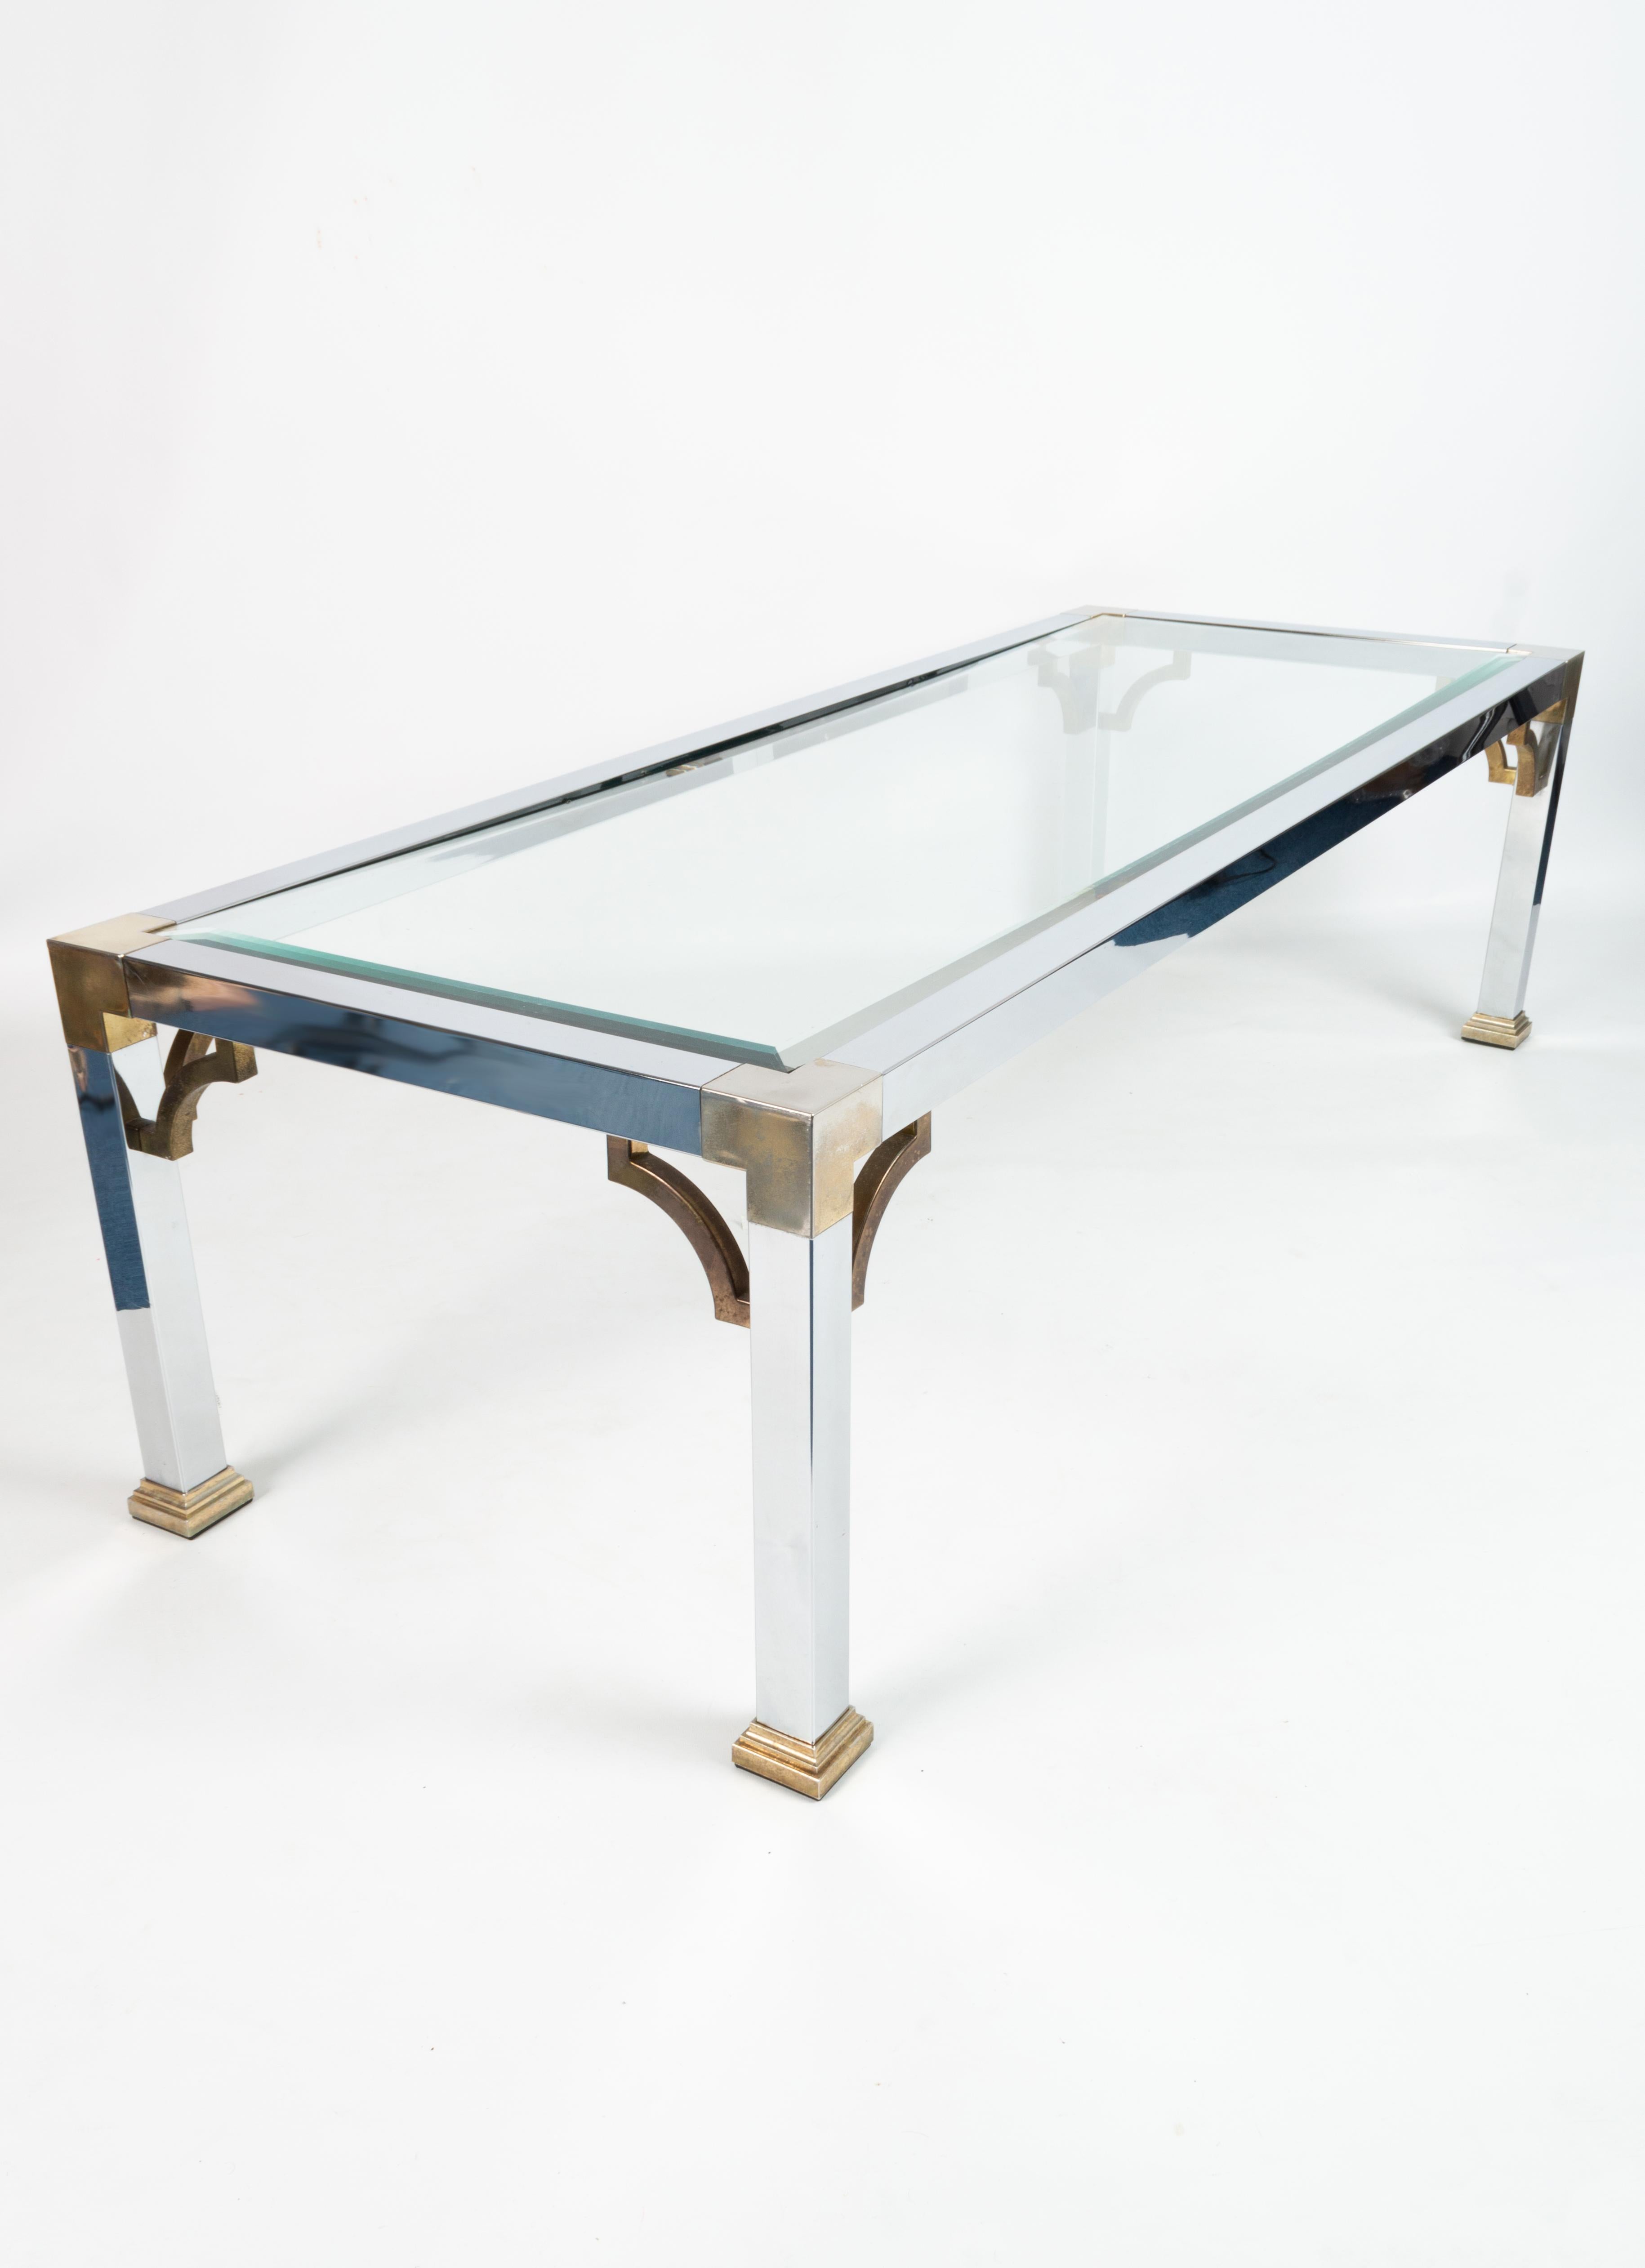 Mid-century chrome and brass long glass top coffee table, Italy C.1970.

In good vintage condition, commensurate with age. Some wear to metal frame, and fleabite to one corner of glass (not visible when in-situ). Please see last photo.

